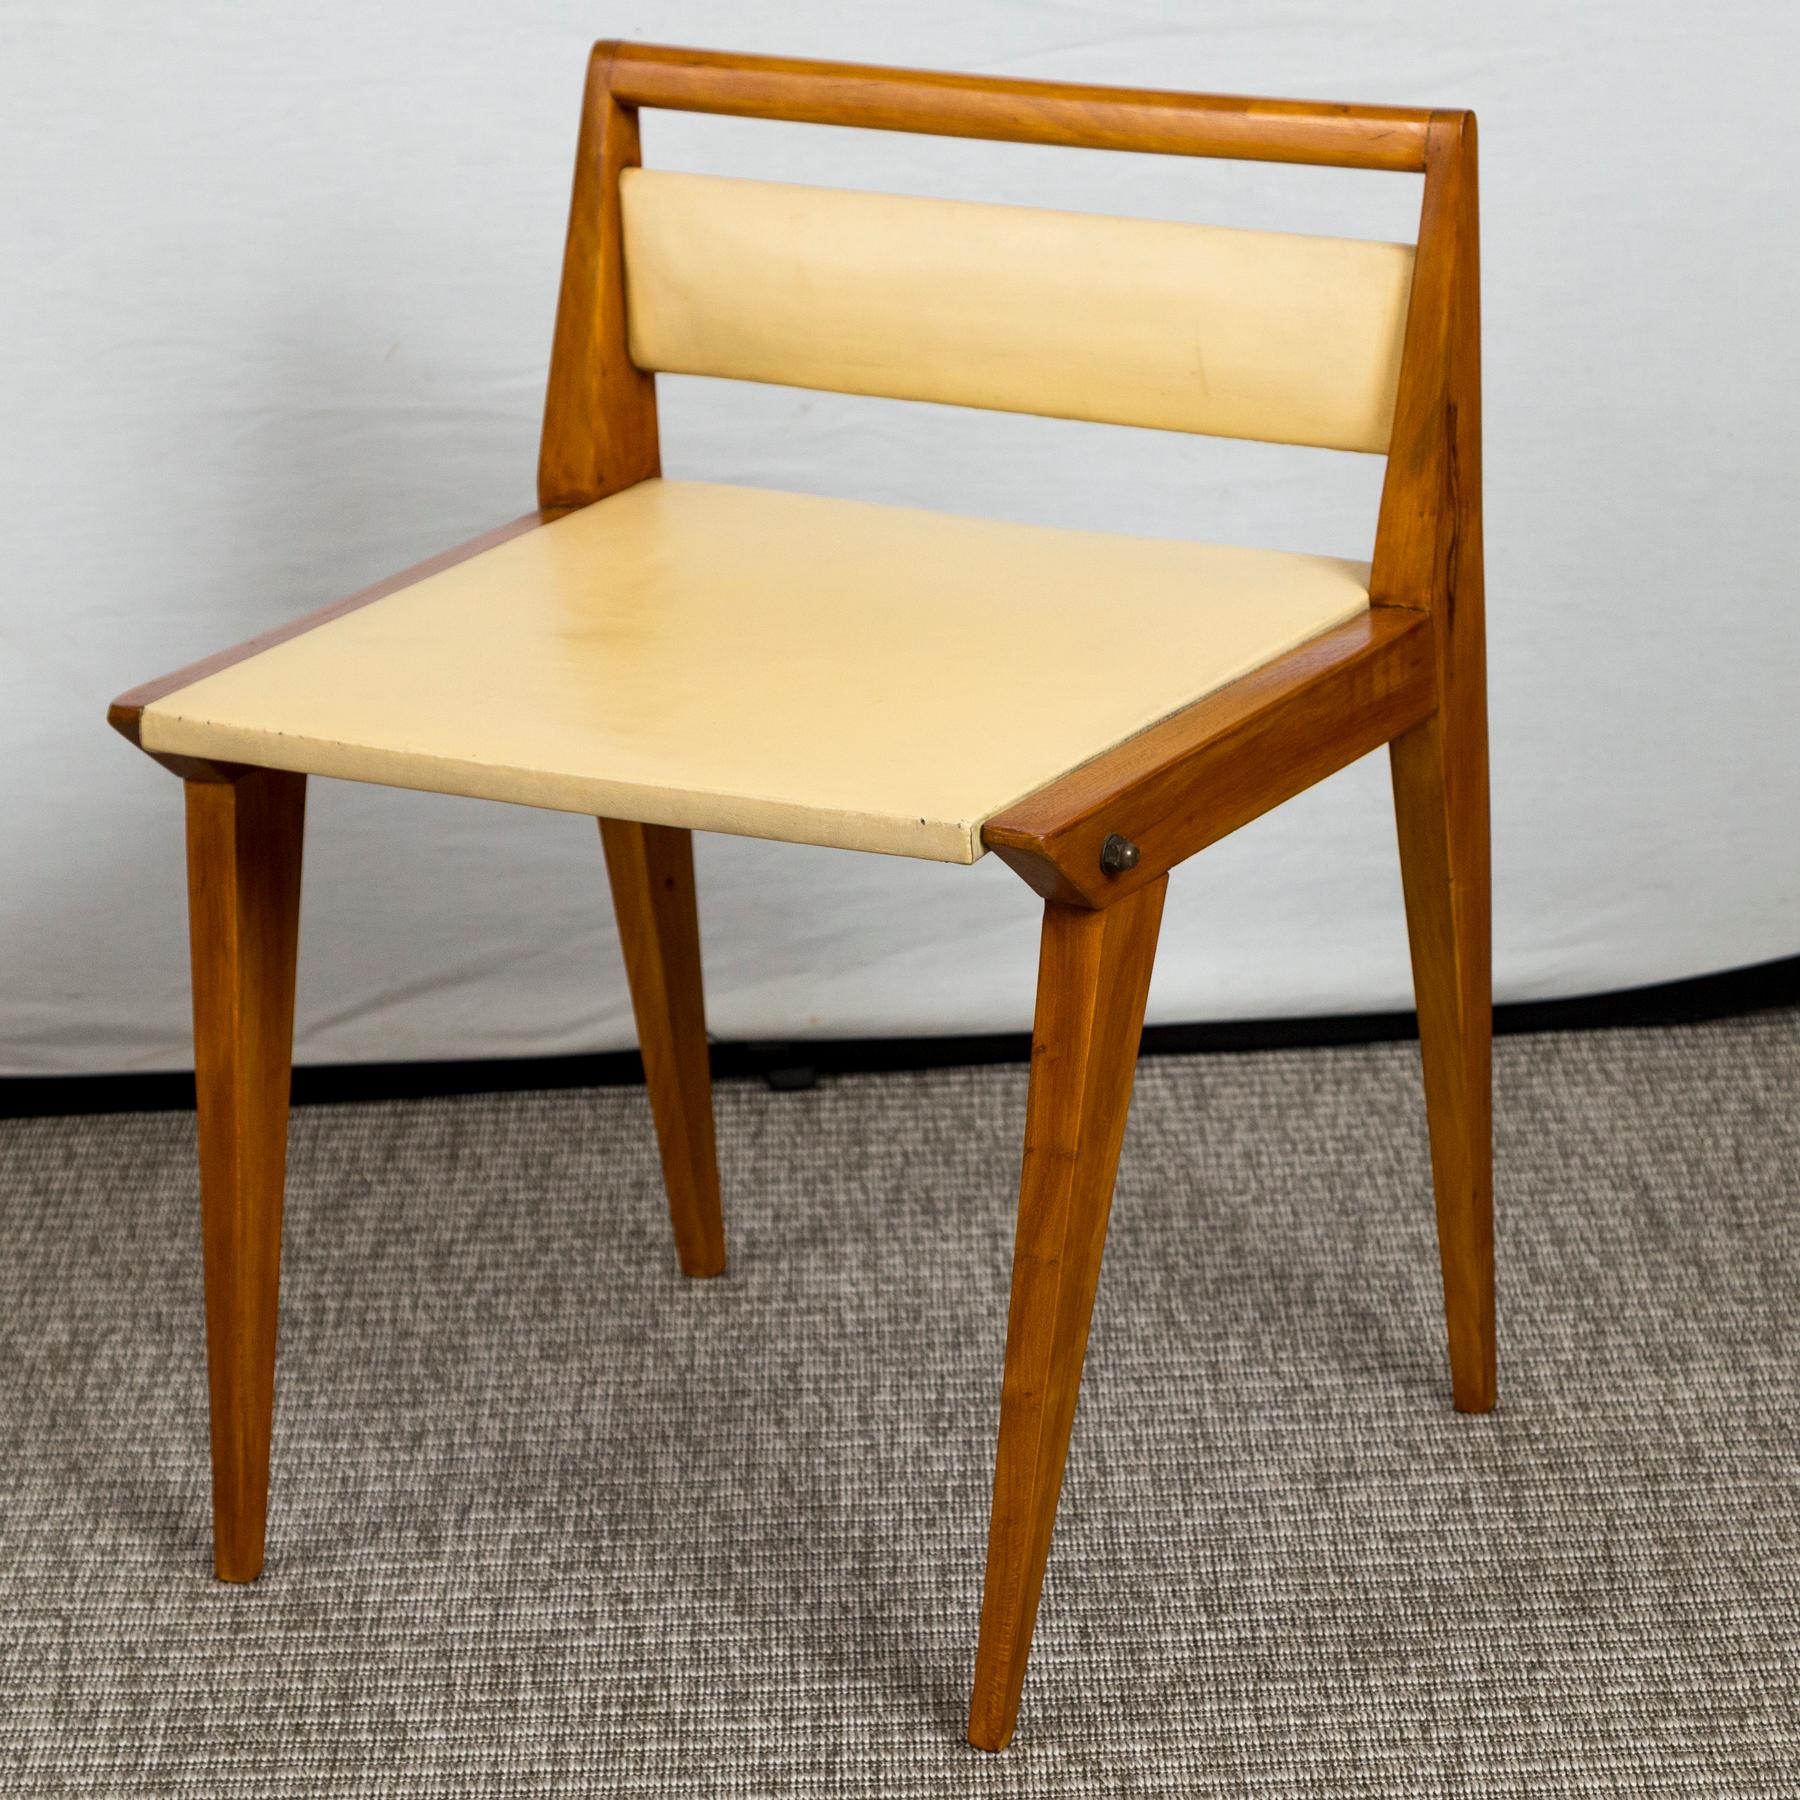 20th Century Unique Italian Modernist Angled Chair   For Sale